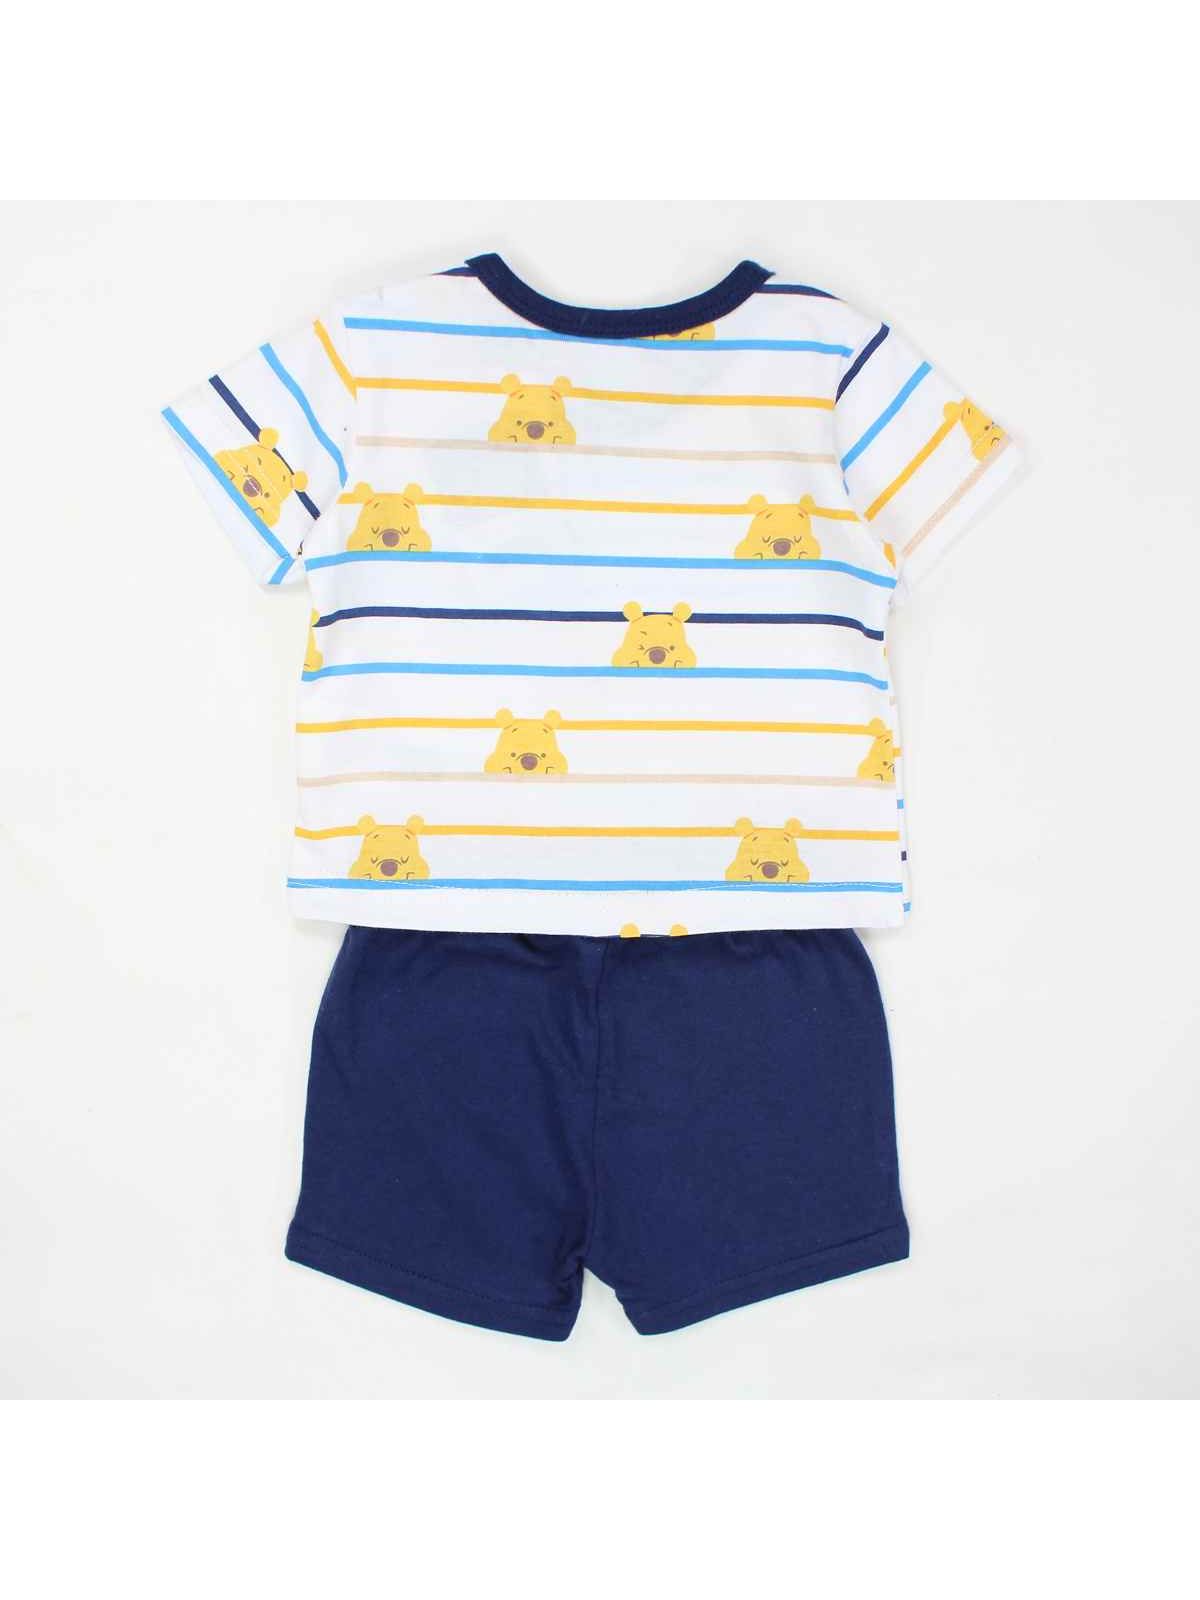 Winnie l'Ourson Clothing of 2 pieces